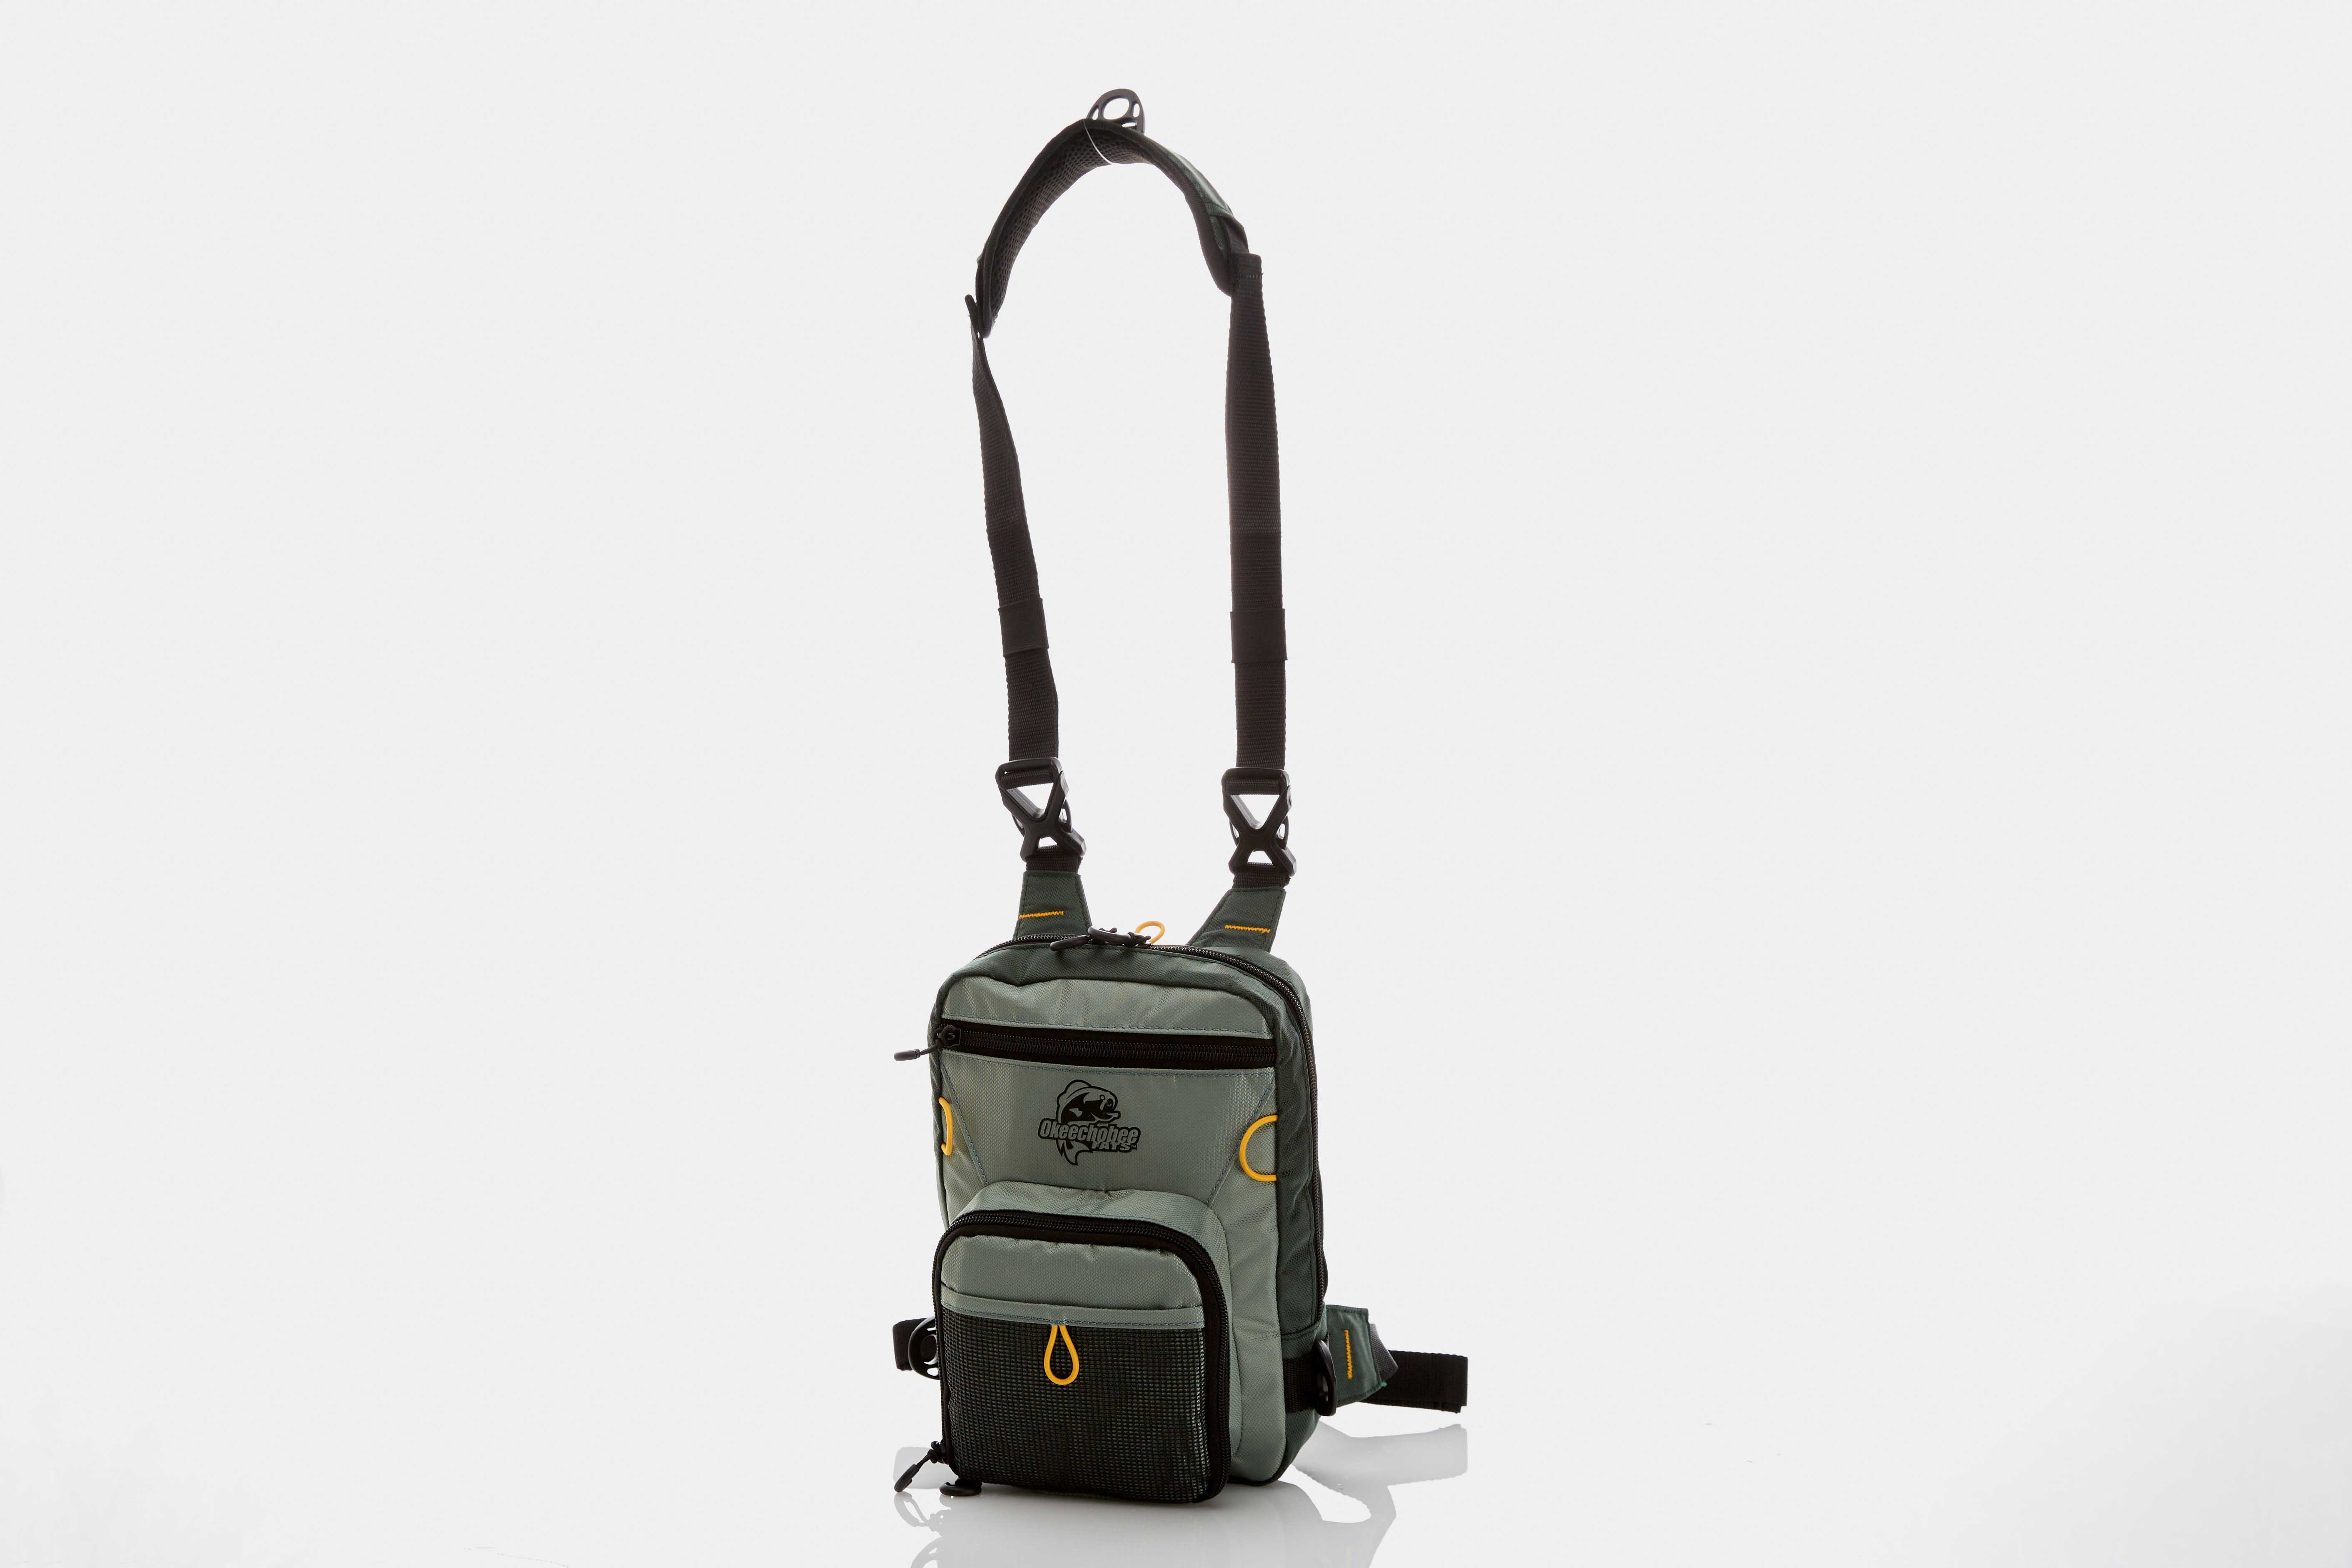 Okeechobee Fats Fly Fishing Tackle Bag Chest Pack, Small Soft